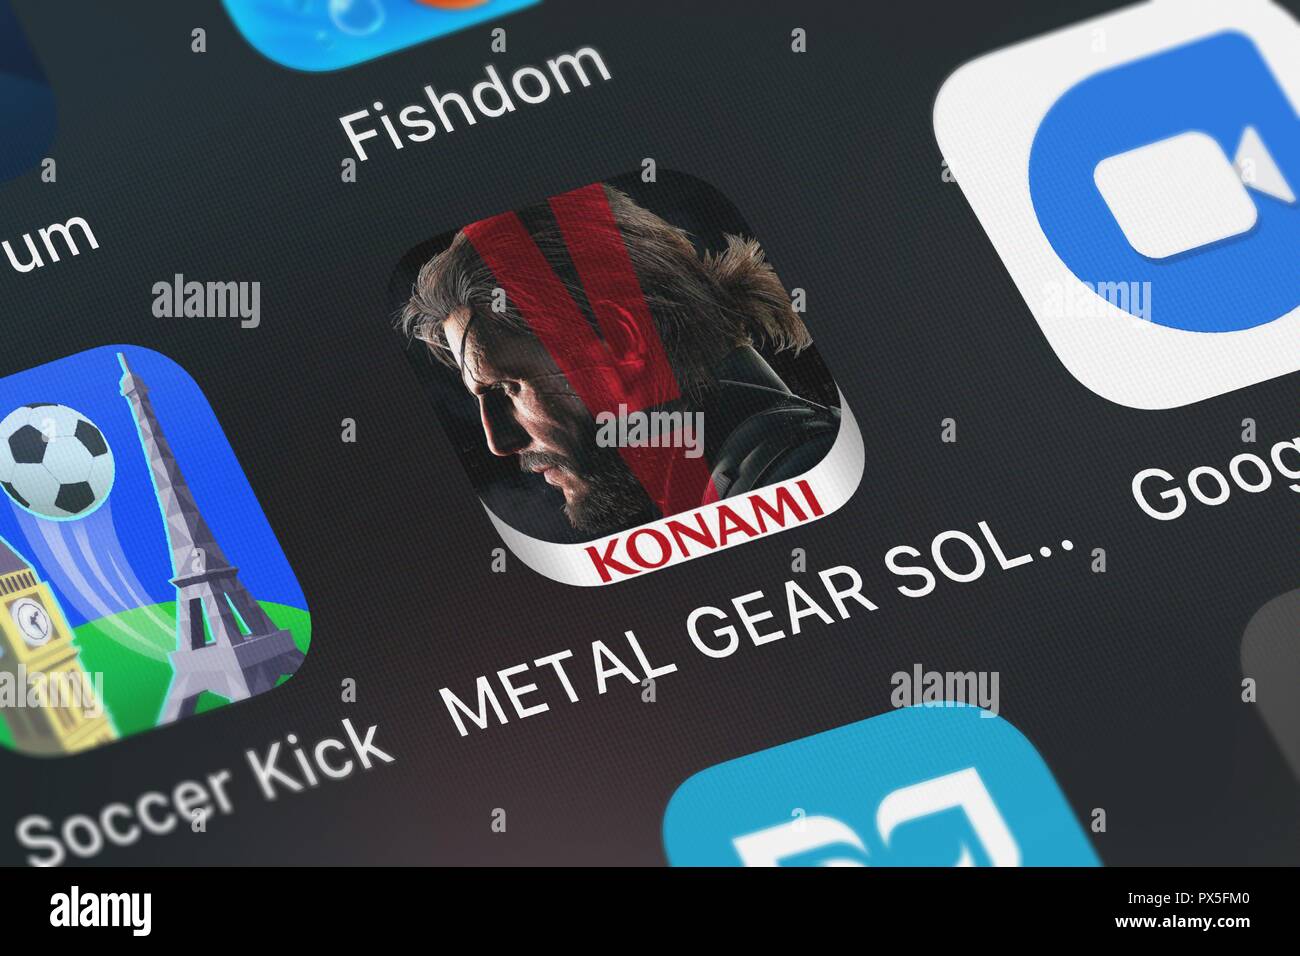 London, United Kingdom - October 19, 2018: Close-up shot of the METAL GEAR SOLID V: THE PHANTOM PAIN mobile app from KONAMI. Stock Photo